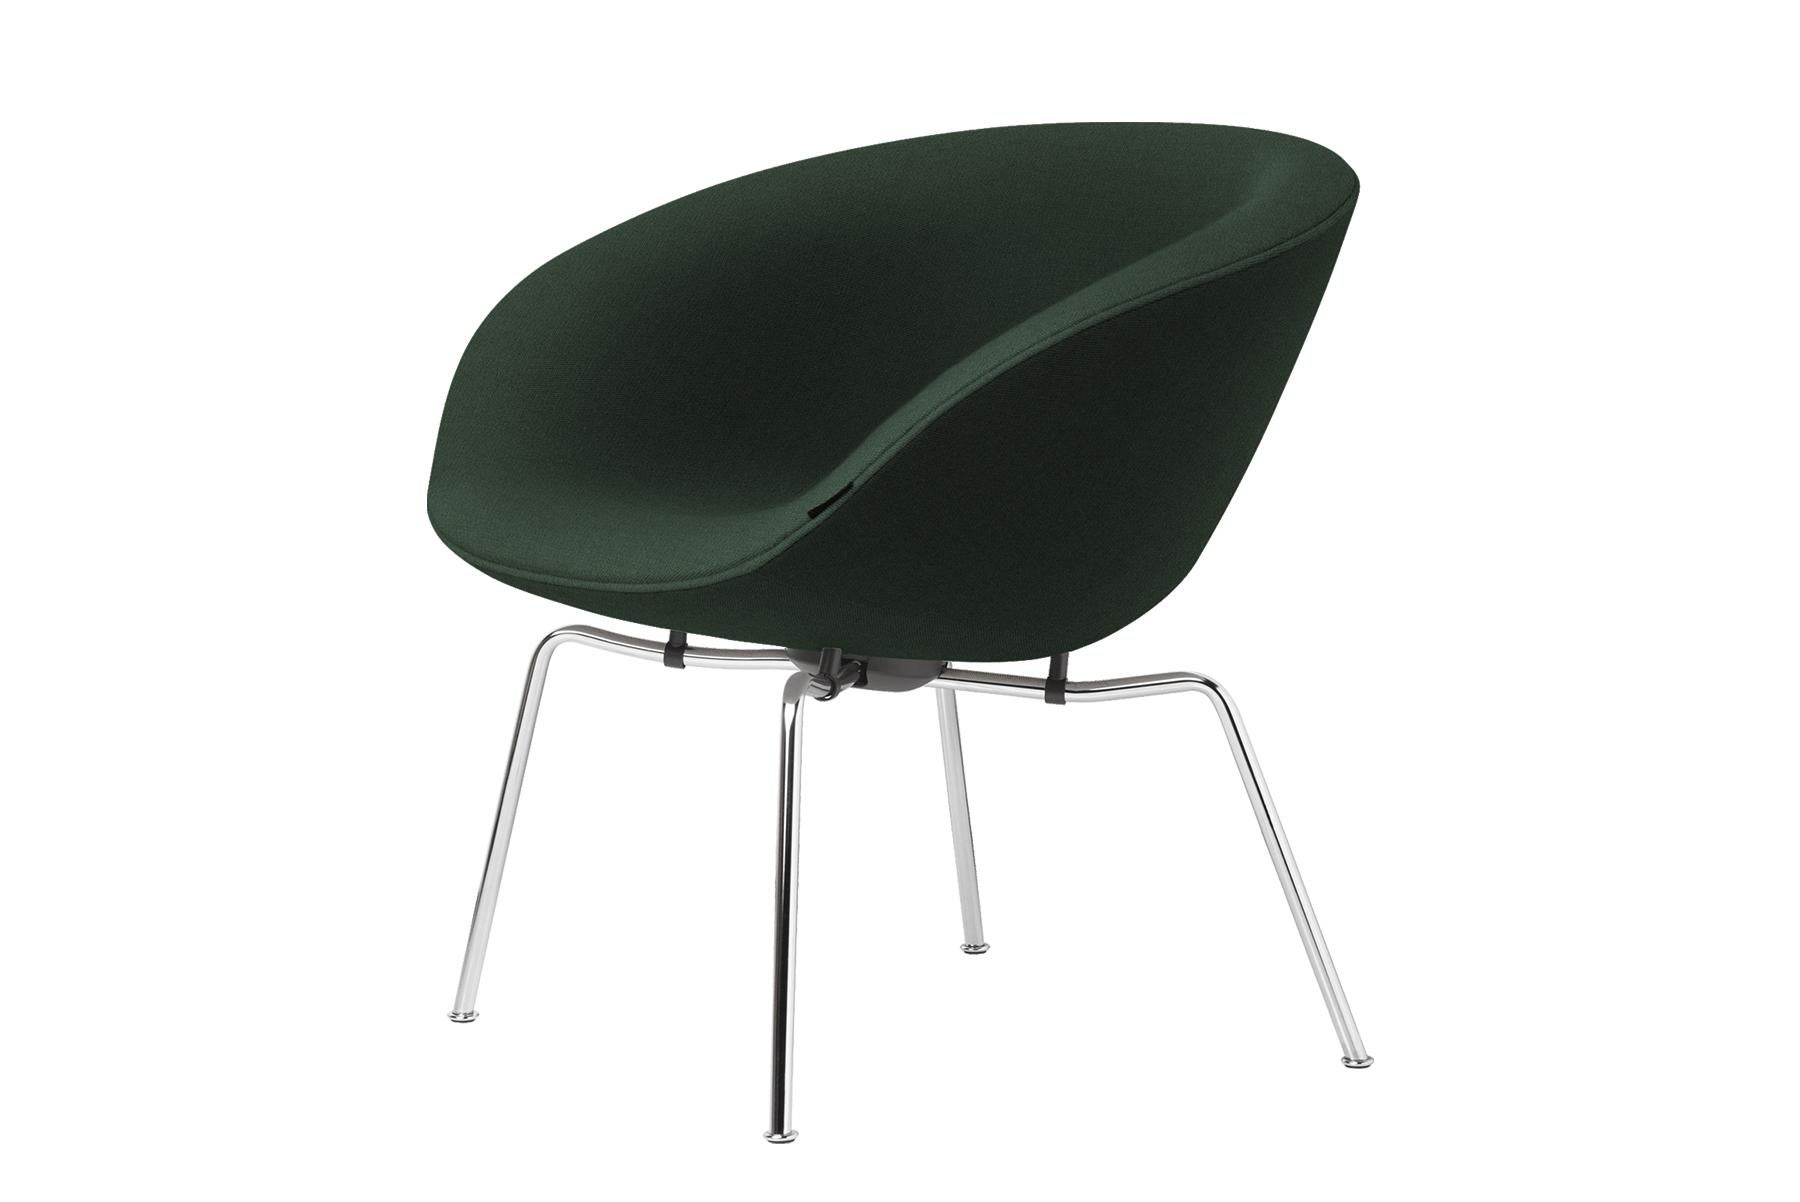 In 1959 Arne Jacobsen created Gryden – in English meaning the Pot – a light take on an embracive lounge chair and originally designed for the SAS Royal Hotel in Copenhagen. The shape is the same as the original design from 1959 – the seat and